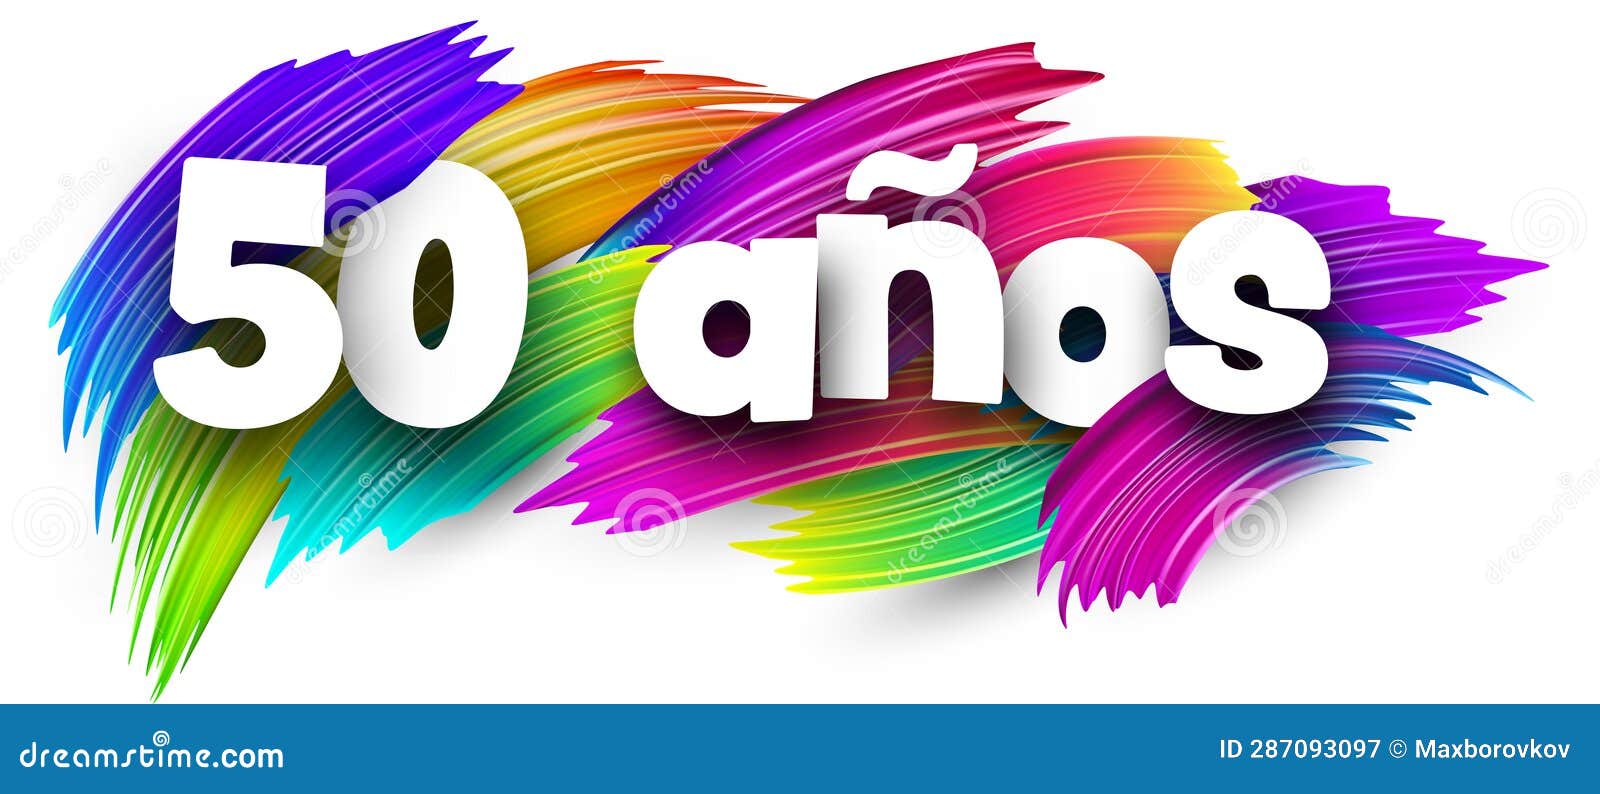 50 years at spanish paper word sign with colorful spectrum paint brush strokes over white